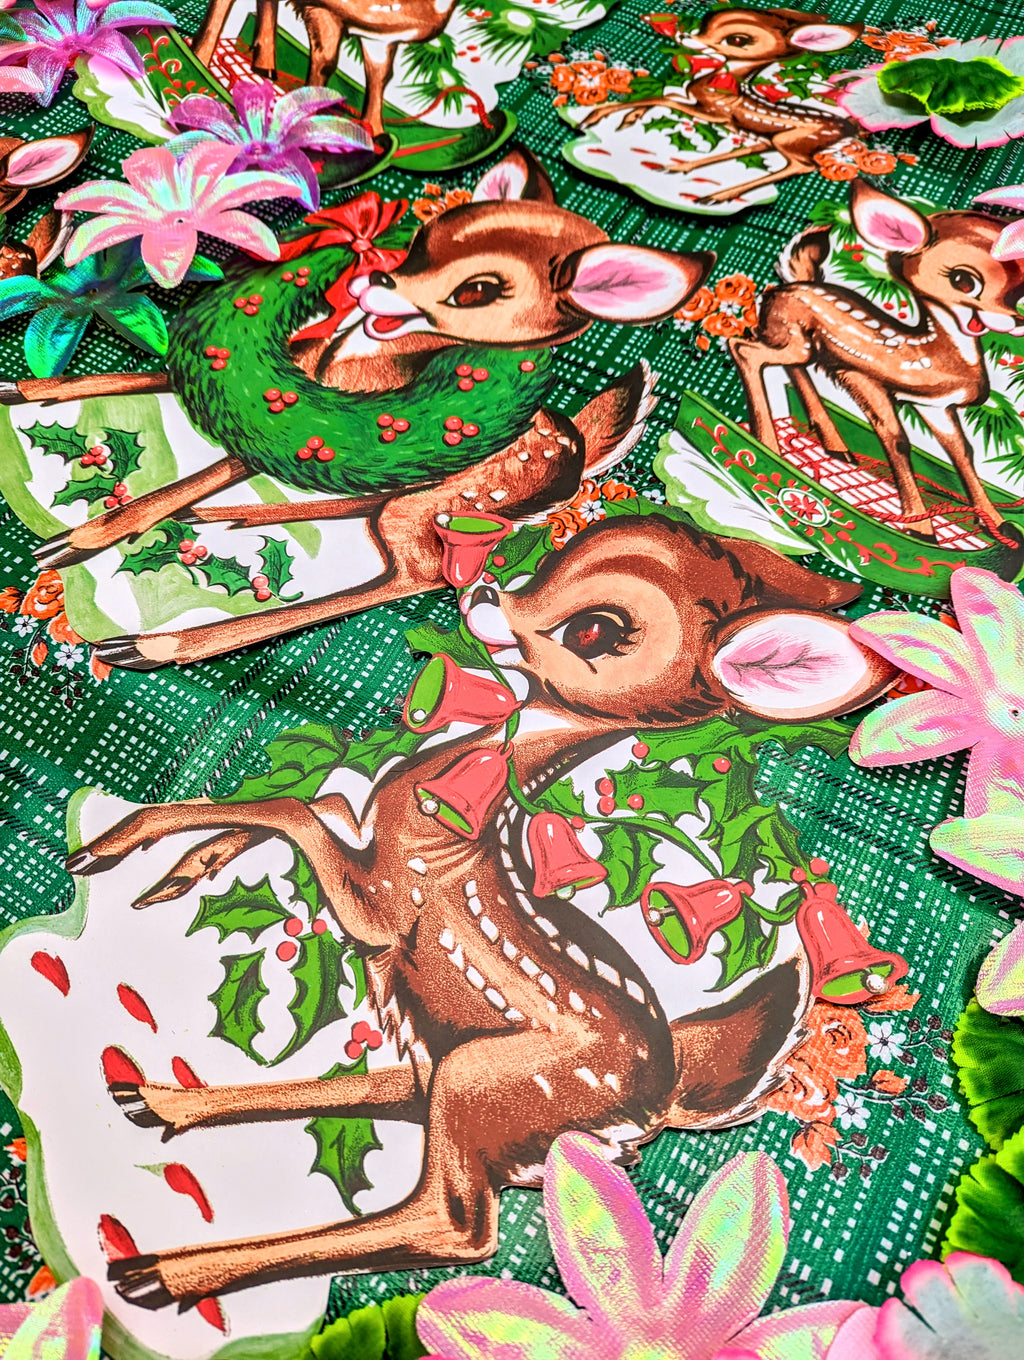 Gorgeous American vintage style Bambi reindeer cut outs for Christmas displays and decorations, these are soooooocute!!!

Pack of 6 containing

3 x 36cm high and 3 X 25cm high designs.

Made of printed card, printed both sides

 